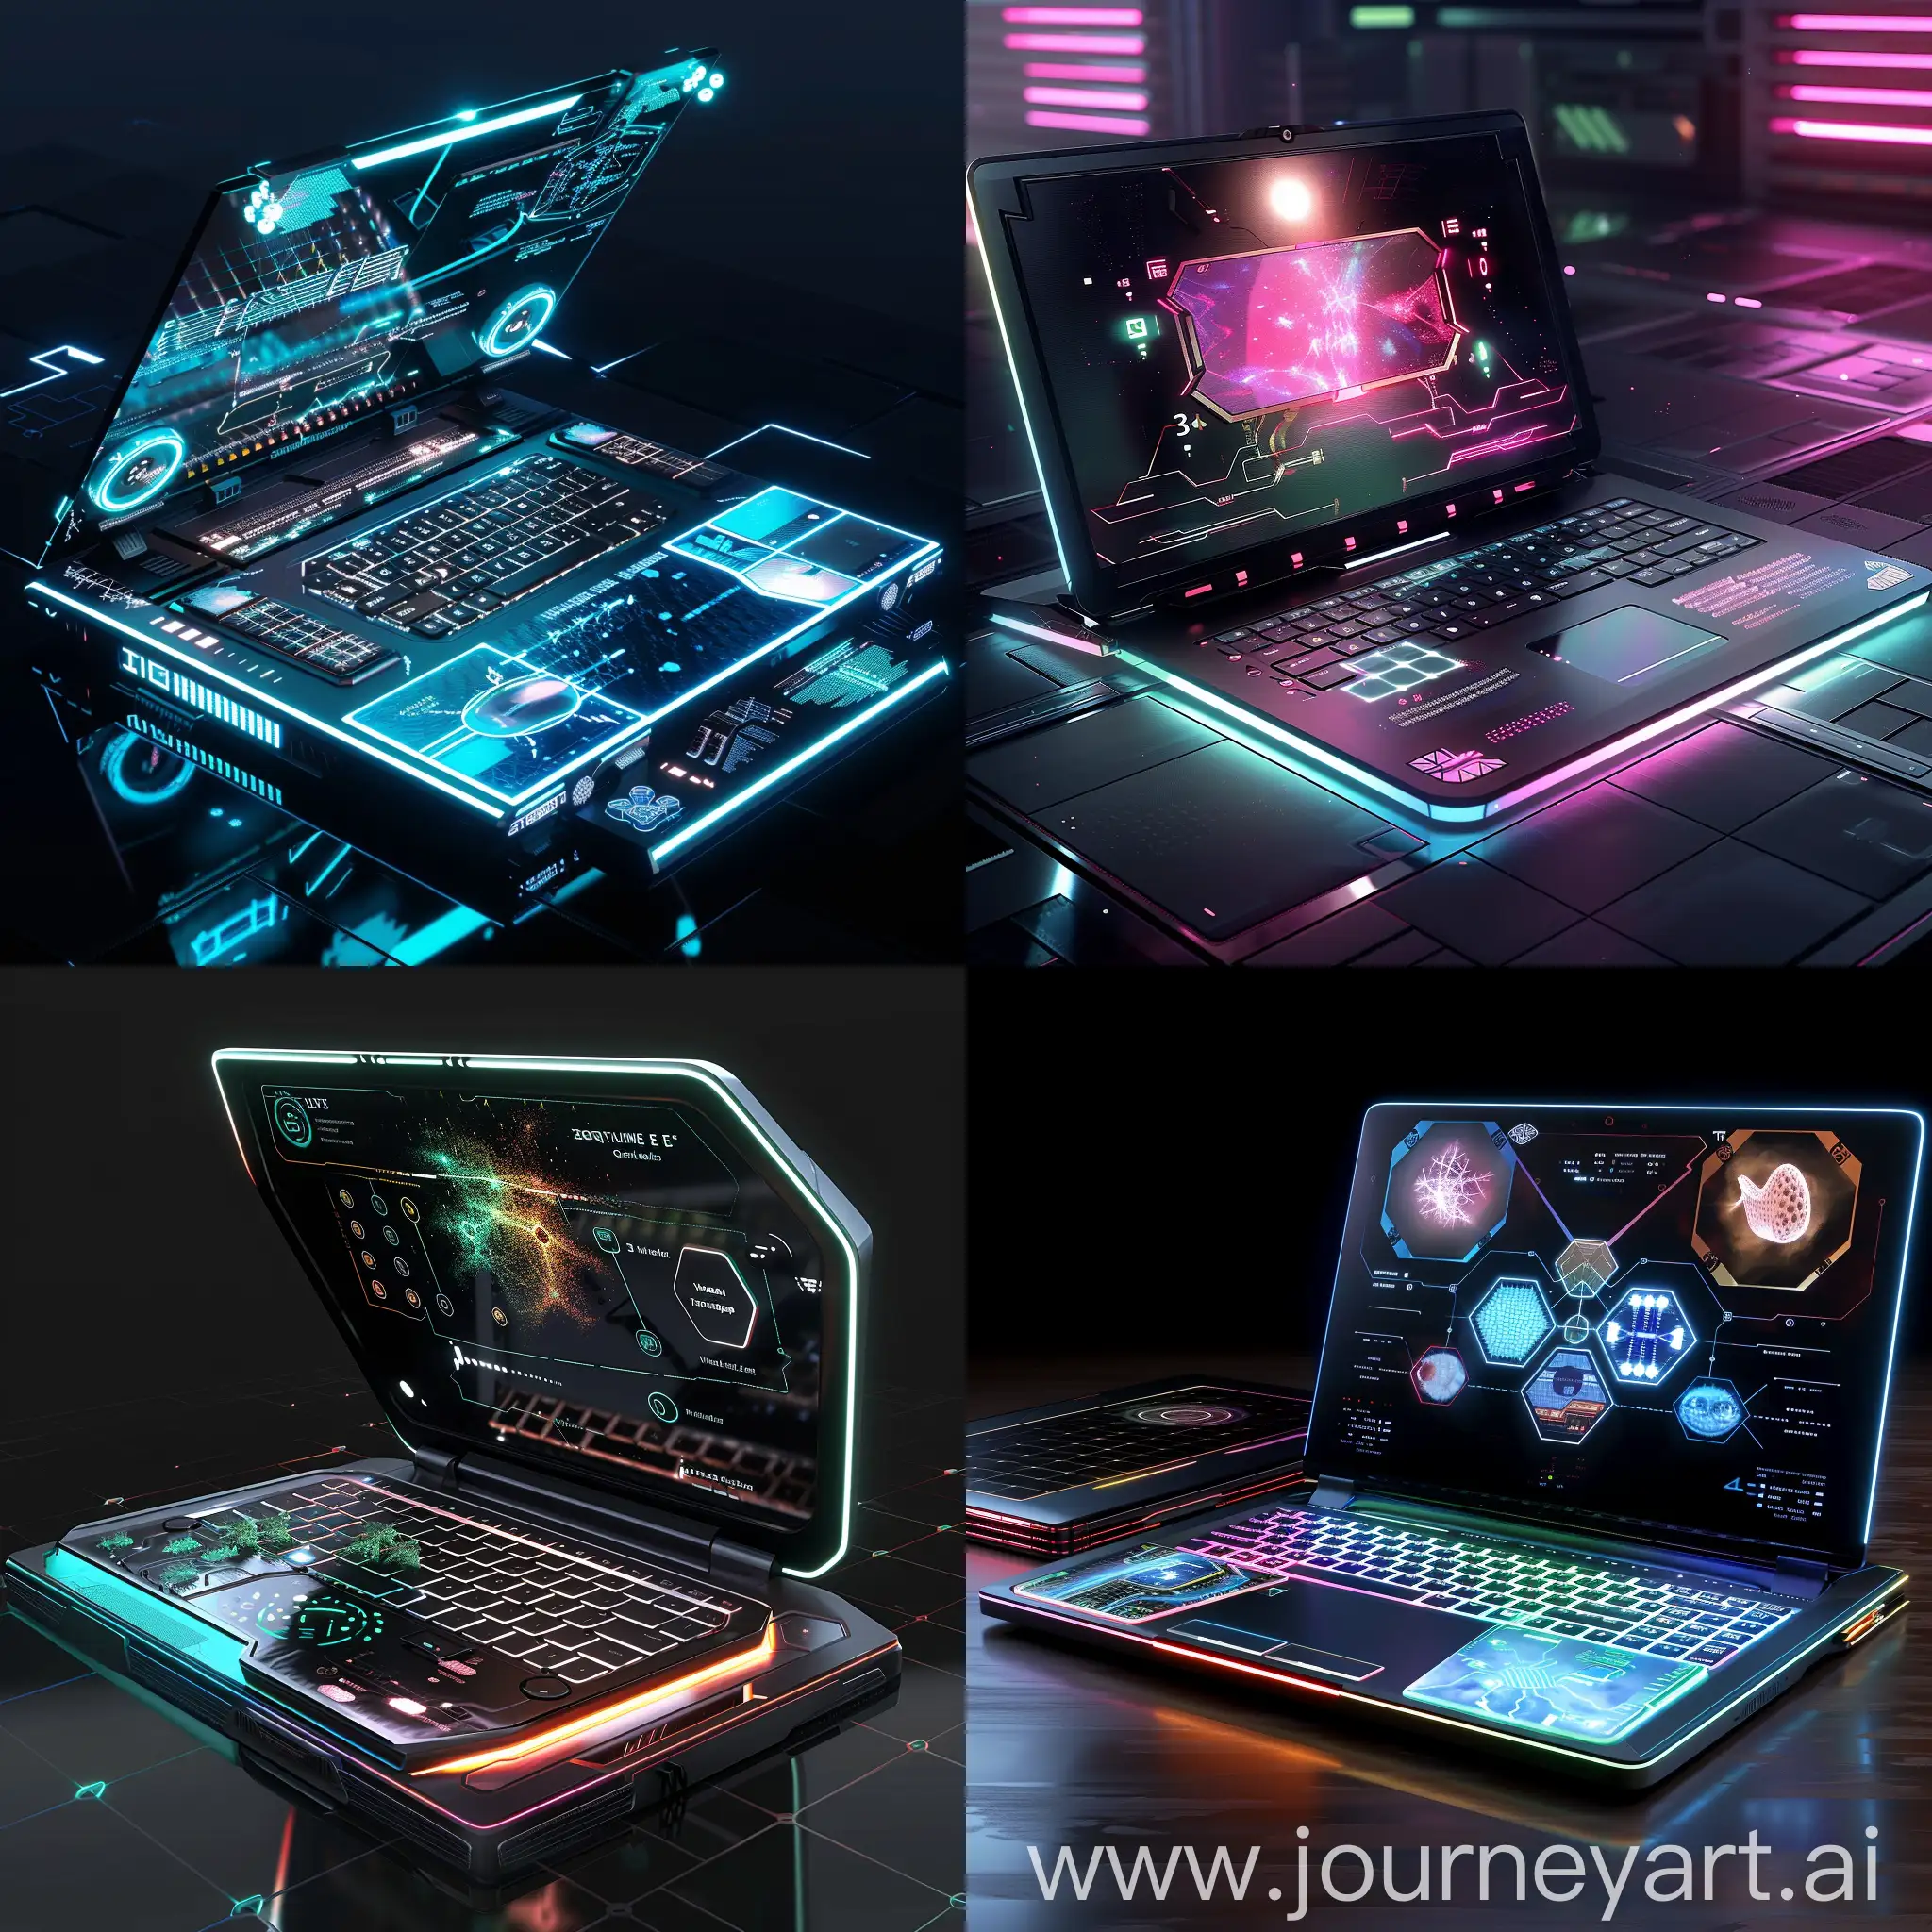 Futuristic laptop, in futuristic style, Quantum Processor, Graphene-based Cooling System, Neural Network Accelerator, 3D Stacked Memory, Optical Computing Interfaces, Biometric Authentication Processor, Solid-State Batteries, Nanotube-based Display Technology, DNA Data Storage, Self-repairing Components, Flexible Display, Holographic Projection, Solar Panel Lid, Dynamic E-Ink Keyboard, Biometric Touchpad, Augmented Reality Cameras, Modular Expansion Ports, Gesture Control Sensors, Active Noise Cancellation Microphones, Wireless Charging Dock, Dynamic RGB LED Backlighting, Ambient Light Sensors, Interactive Light Bar, Biometric Indicator Lights, Illuminated Touchpad, Lighting Effects Synchronization, Health Monitoring LEDs, Adaptive Color Temperature Control, Wireless Charging Status Lights, Immersive Illumination Zones, Dynamic LED Accent Lighting, Interactive Notification Lights, Light-Up Logo, Illuminated Ports, Glow-in-the-Dark Elements, Reflective Light Diffusers, Wireless Charging Indicator Lights, Reactive Touch Sensors, Emissive Hinges, Light-Up Bezels, unreal engine 5 --stylize 1000